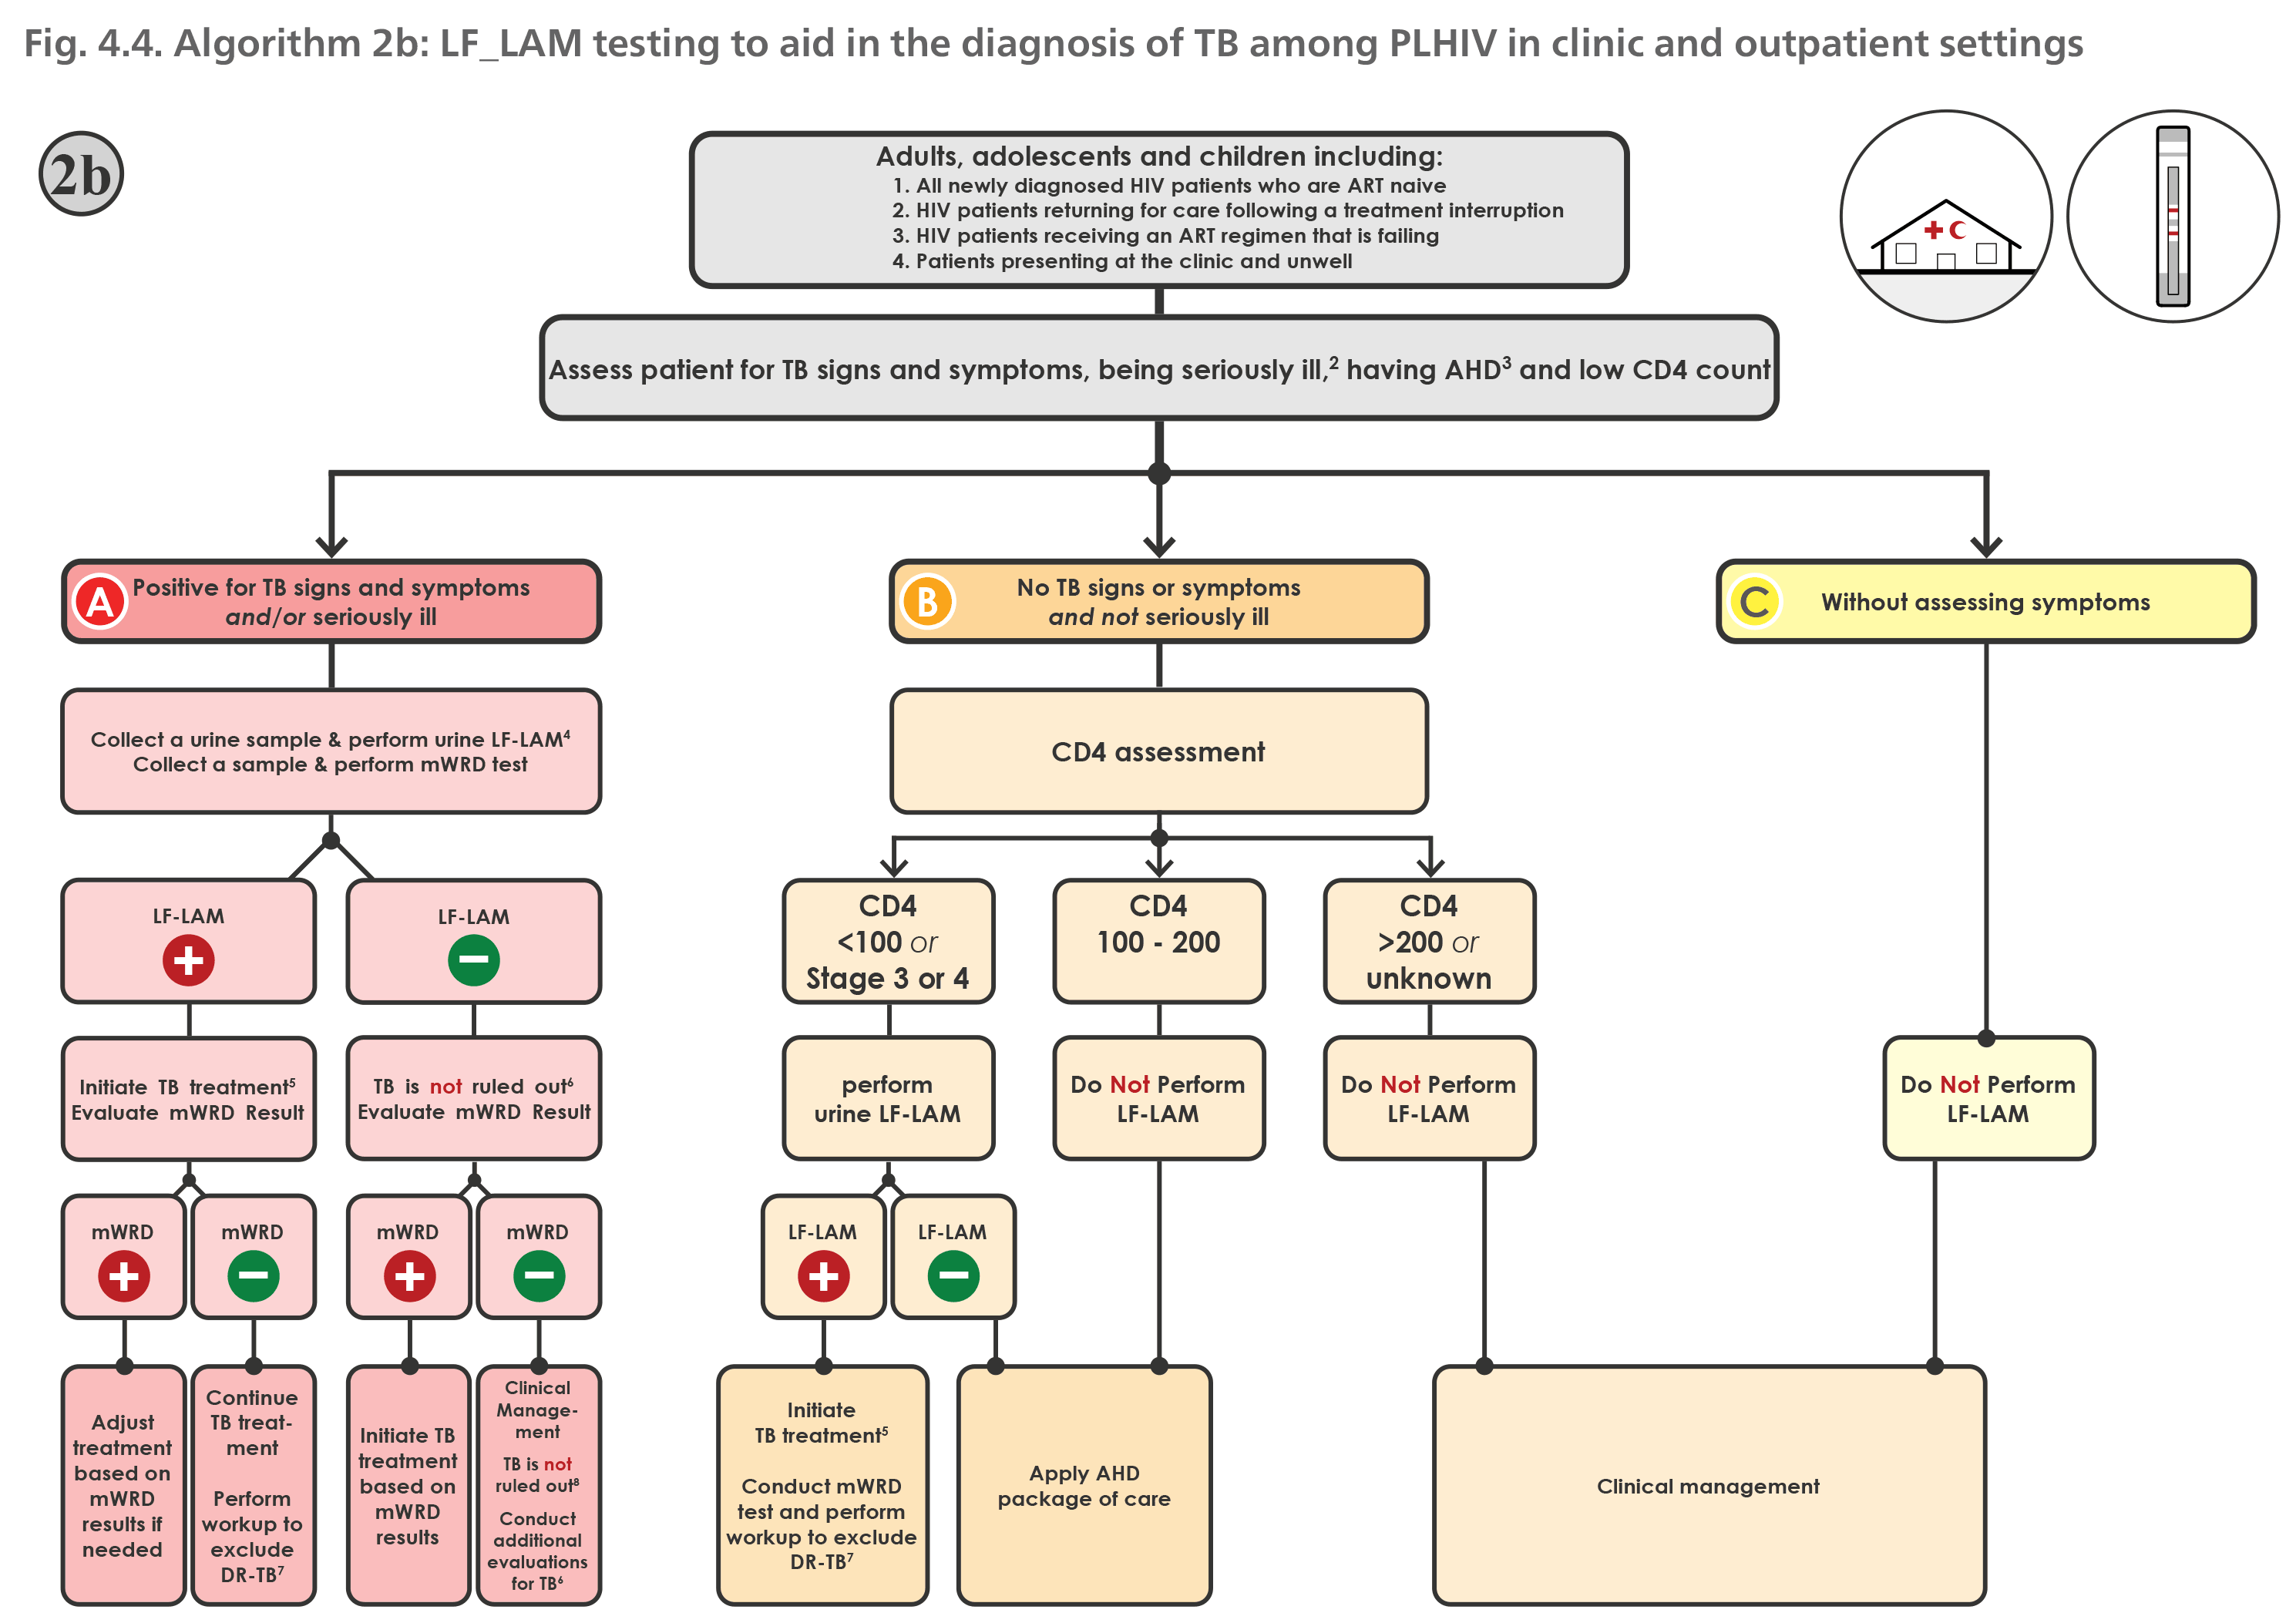 Algorithm 2b: LF_LAM testing to aid in the diagnosis of TB among PLHIV in clinic and outpatient settings